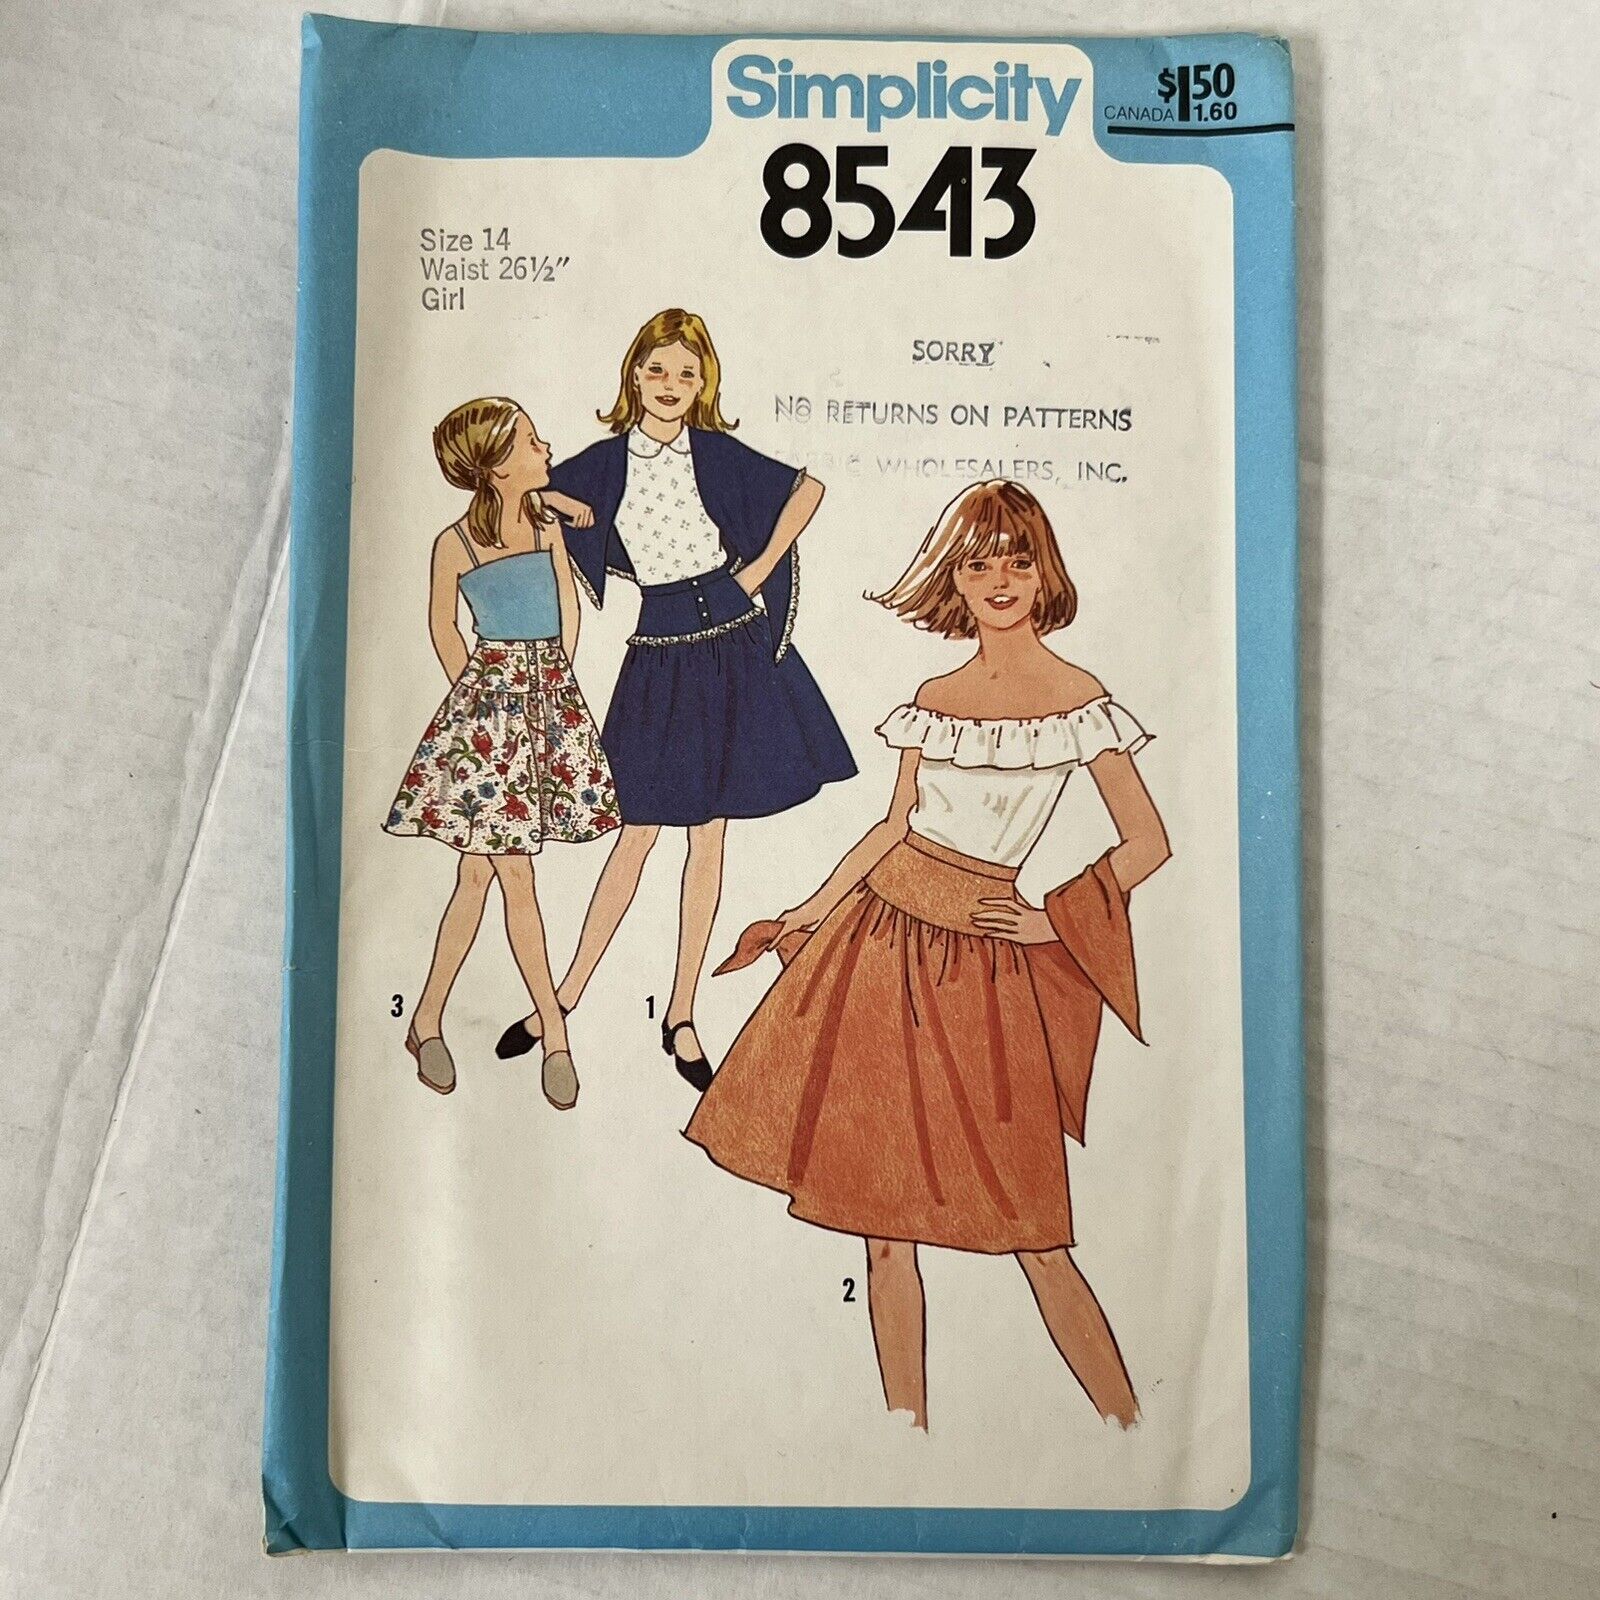 Vintage 1970’s Simplicity Sewing Pattern 8543 Girls Size 14. Midi Skirt & Blouse